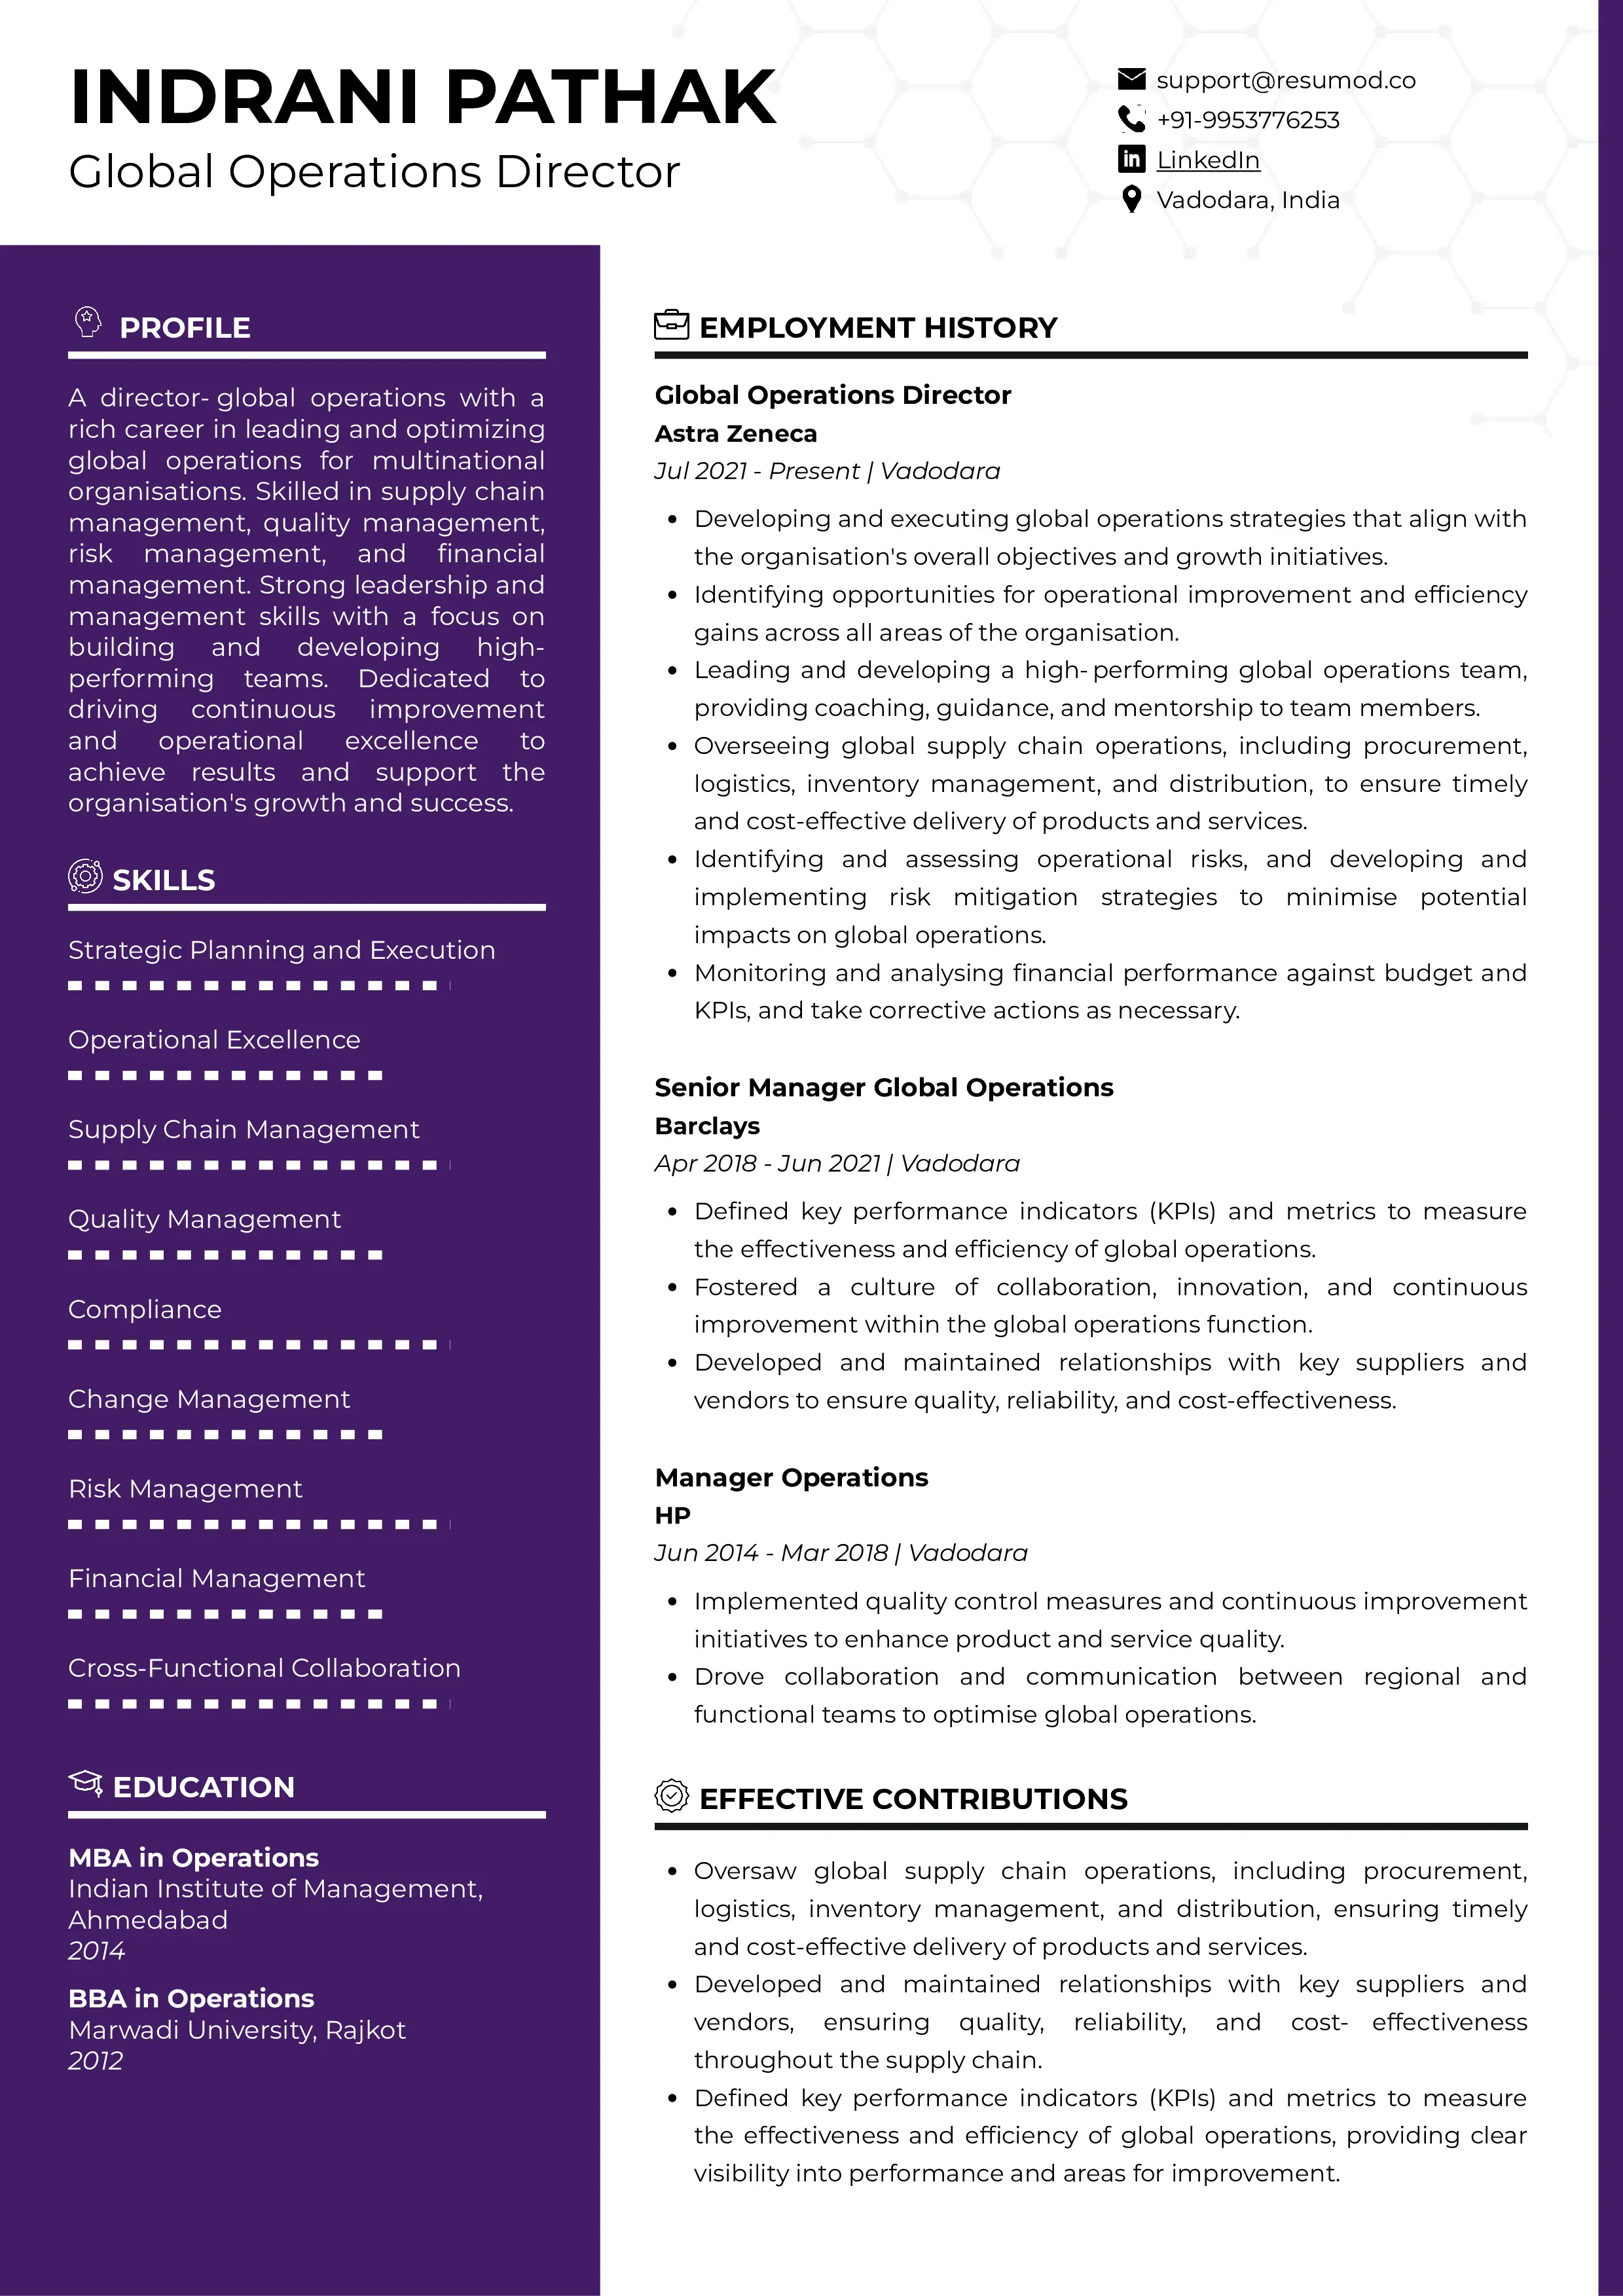 Sample Resume of Global Operations Director | Free Resume Templates & Samples on Resumod.co